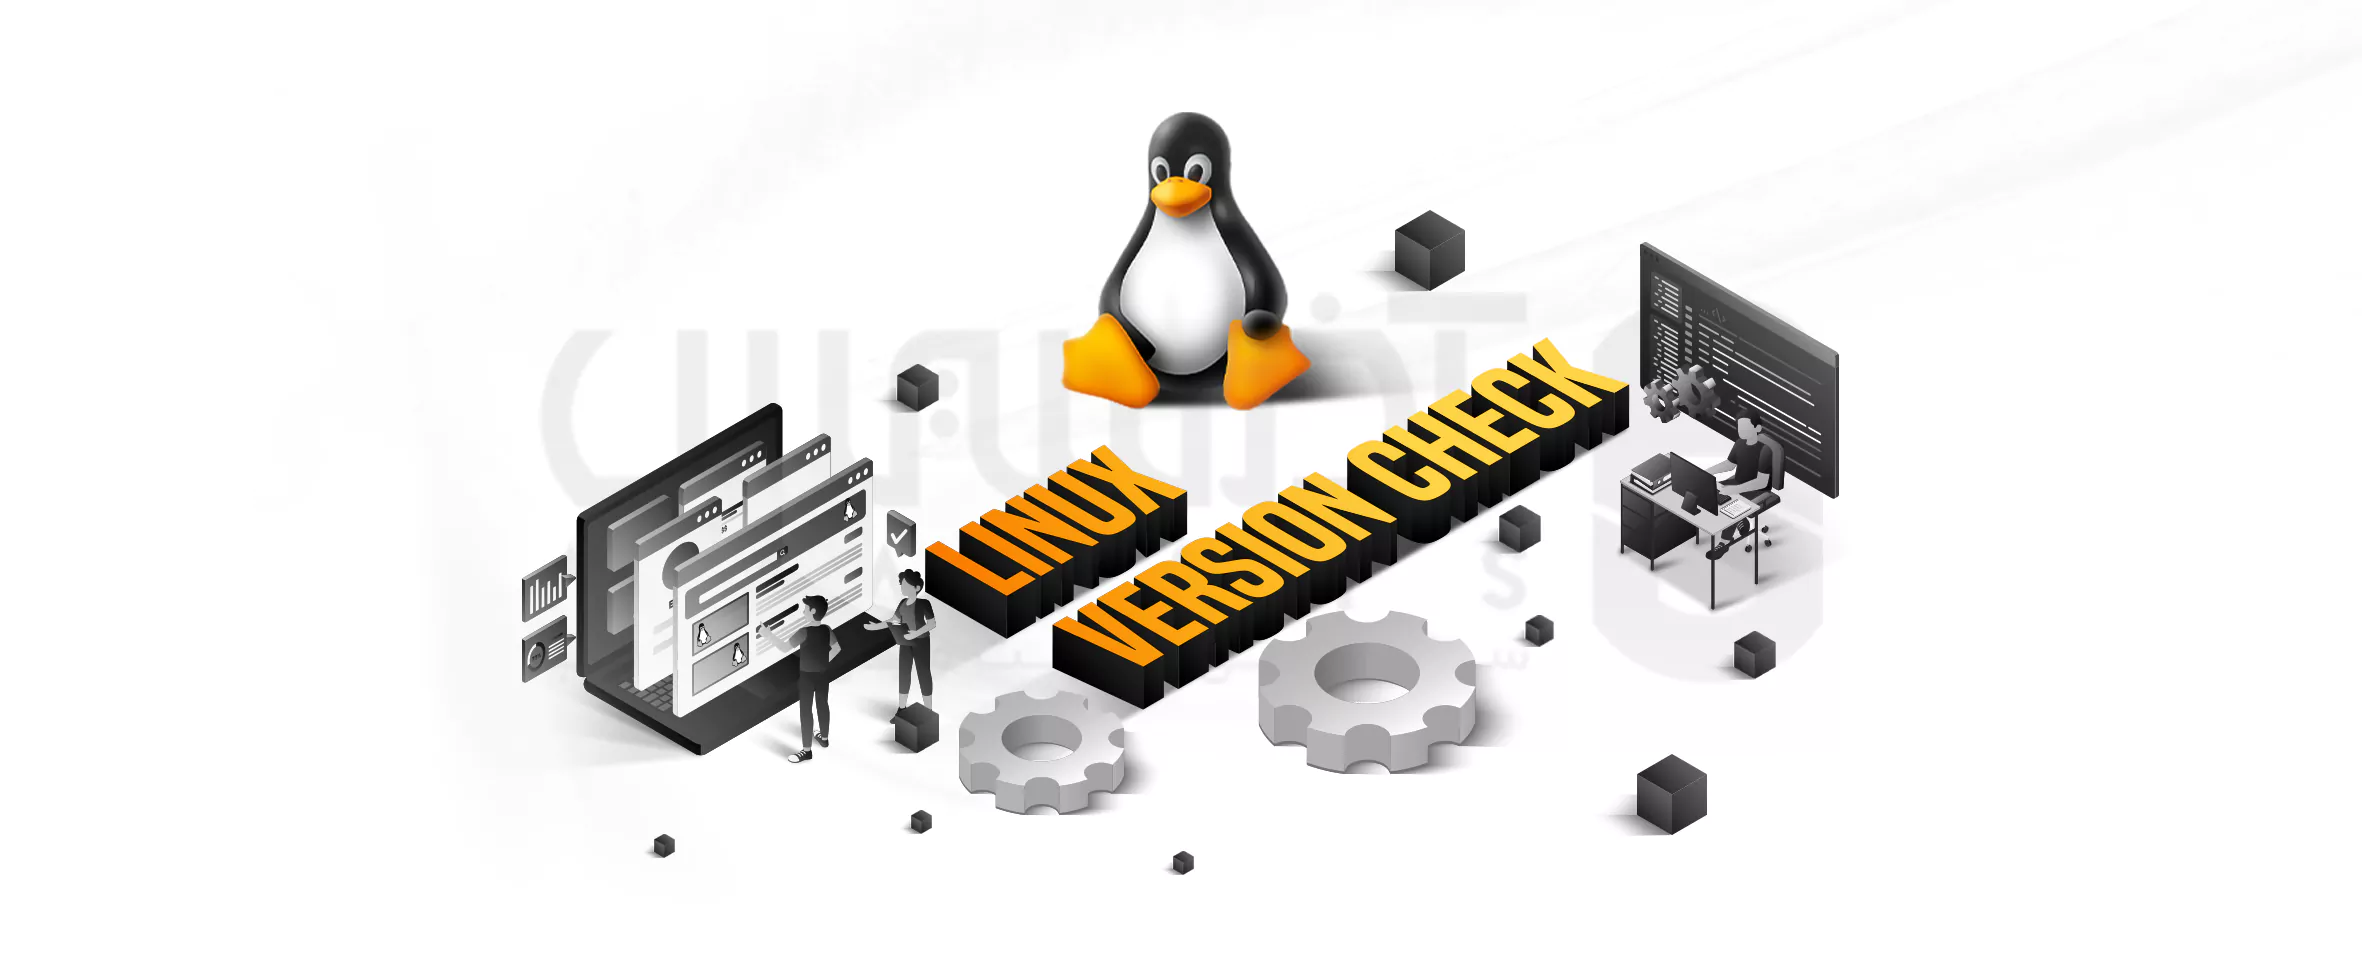 How to check the Linux version 4 practical commands 1